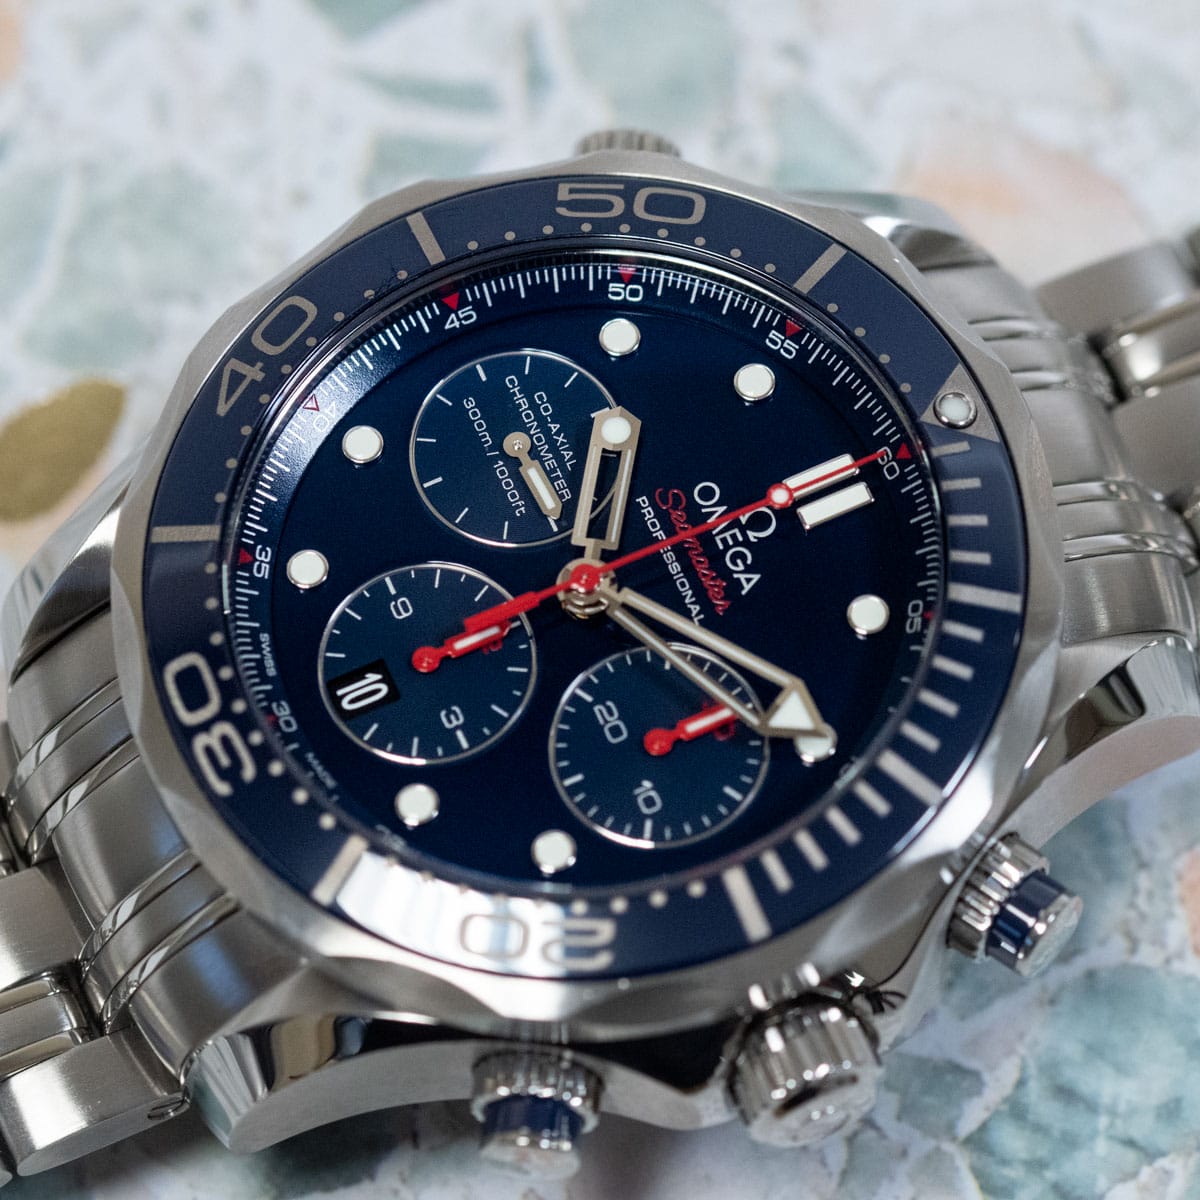 Stylied photo of  of Seamaster Diver 300M Chronograph